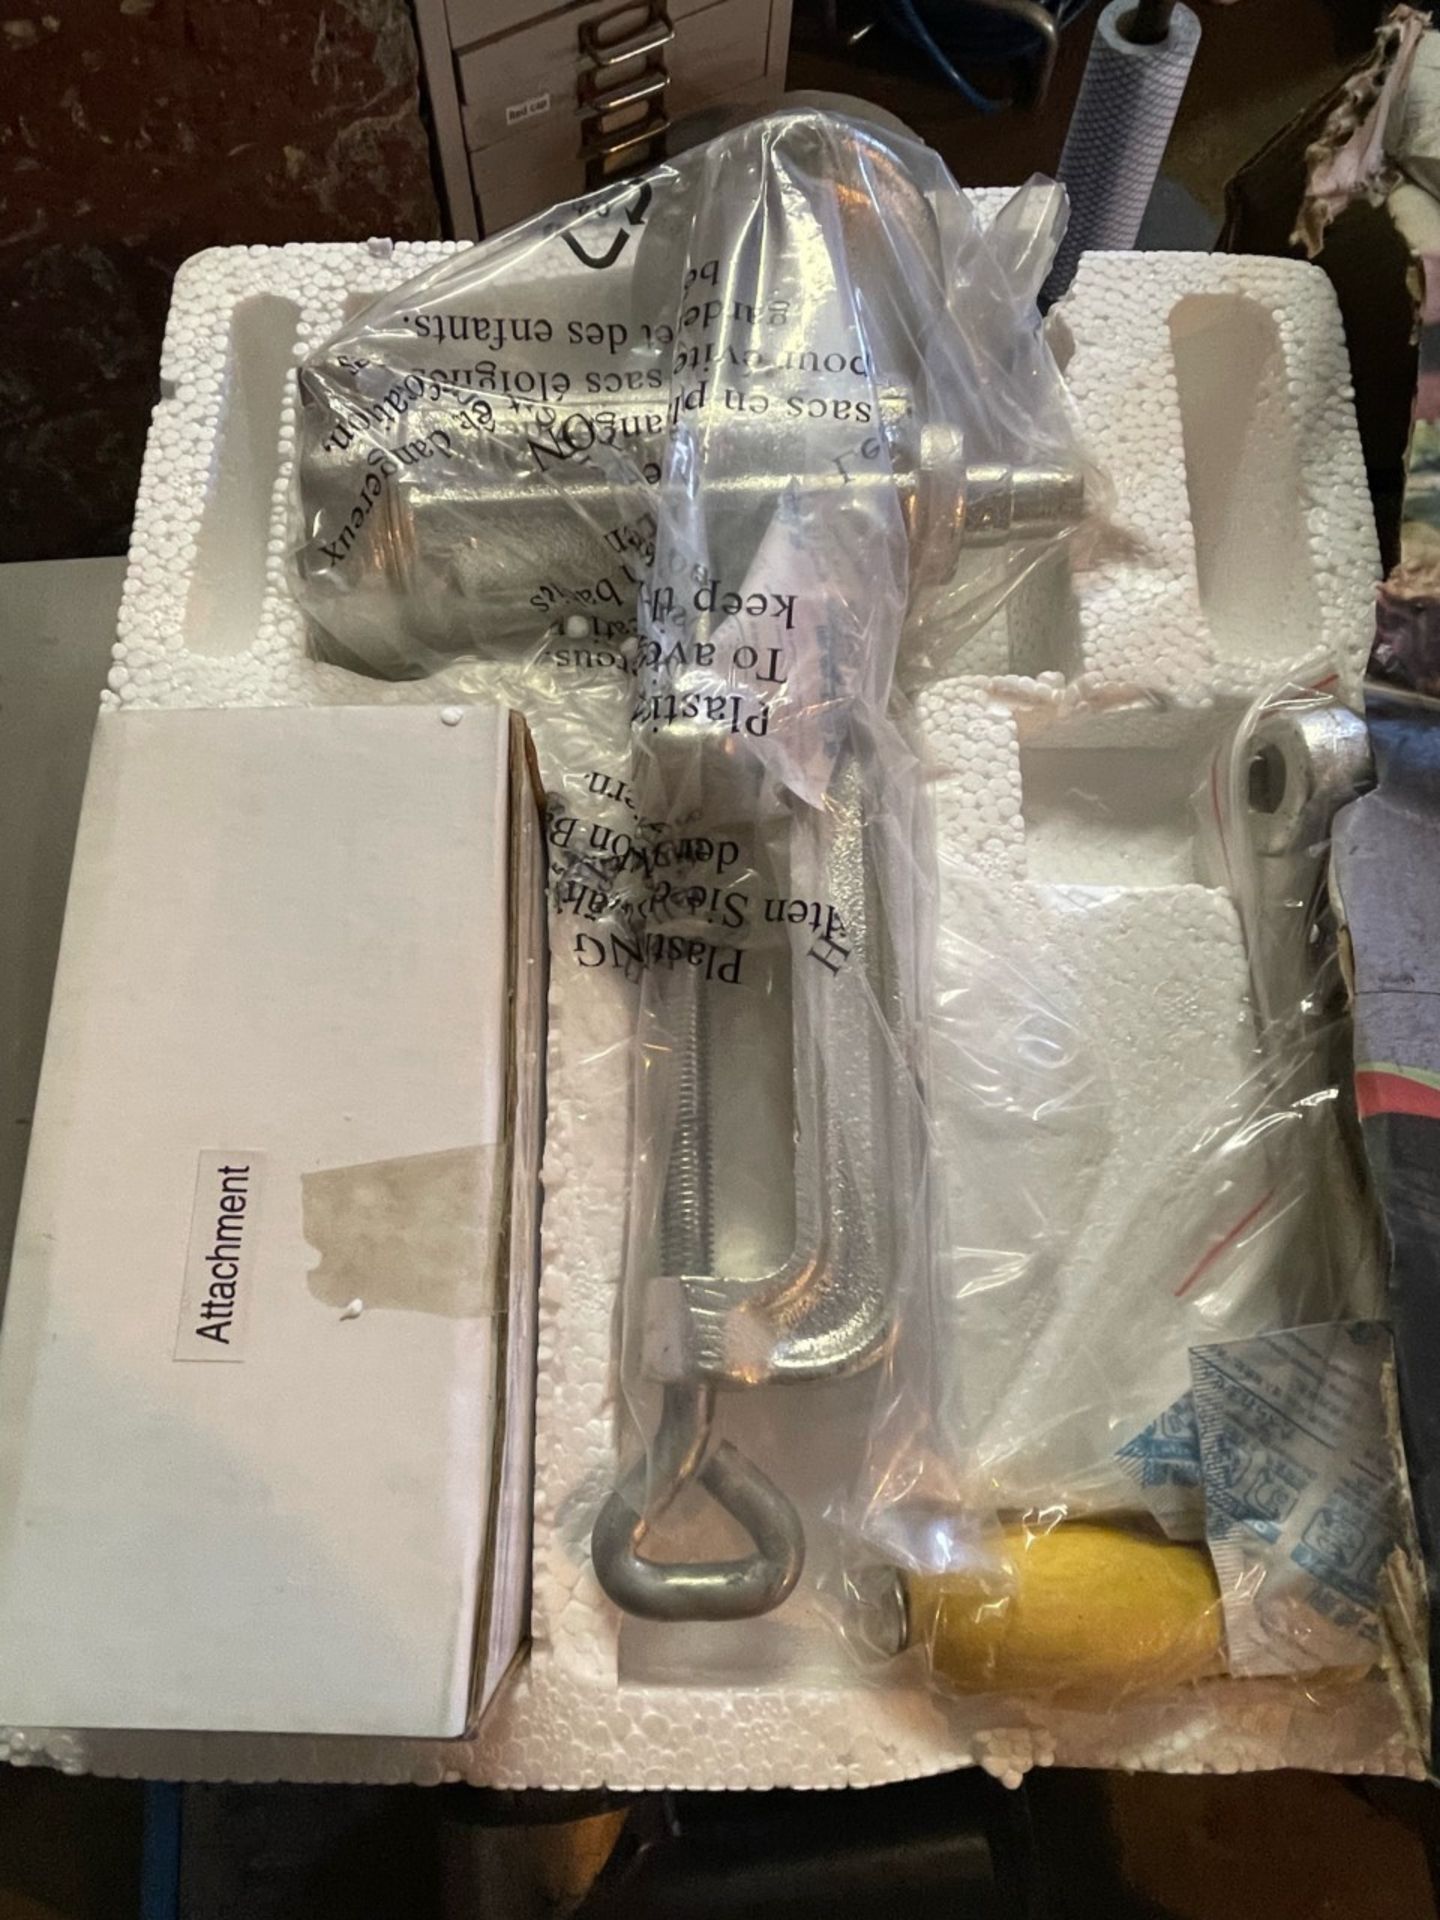 Kitchen craft cast iron meat mincer new in box but box is is damaged. - Image 2 of 2